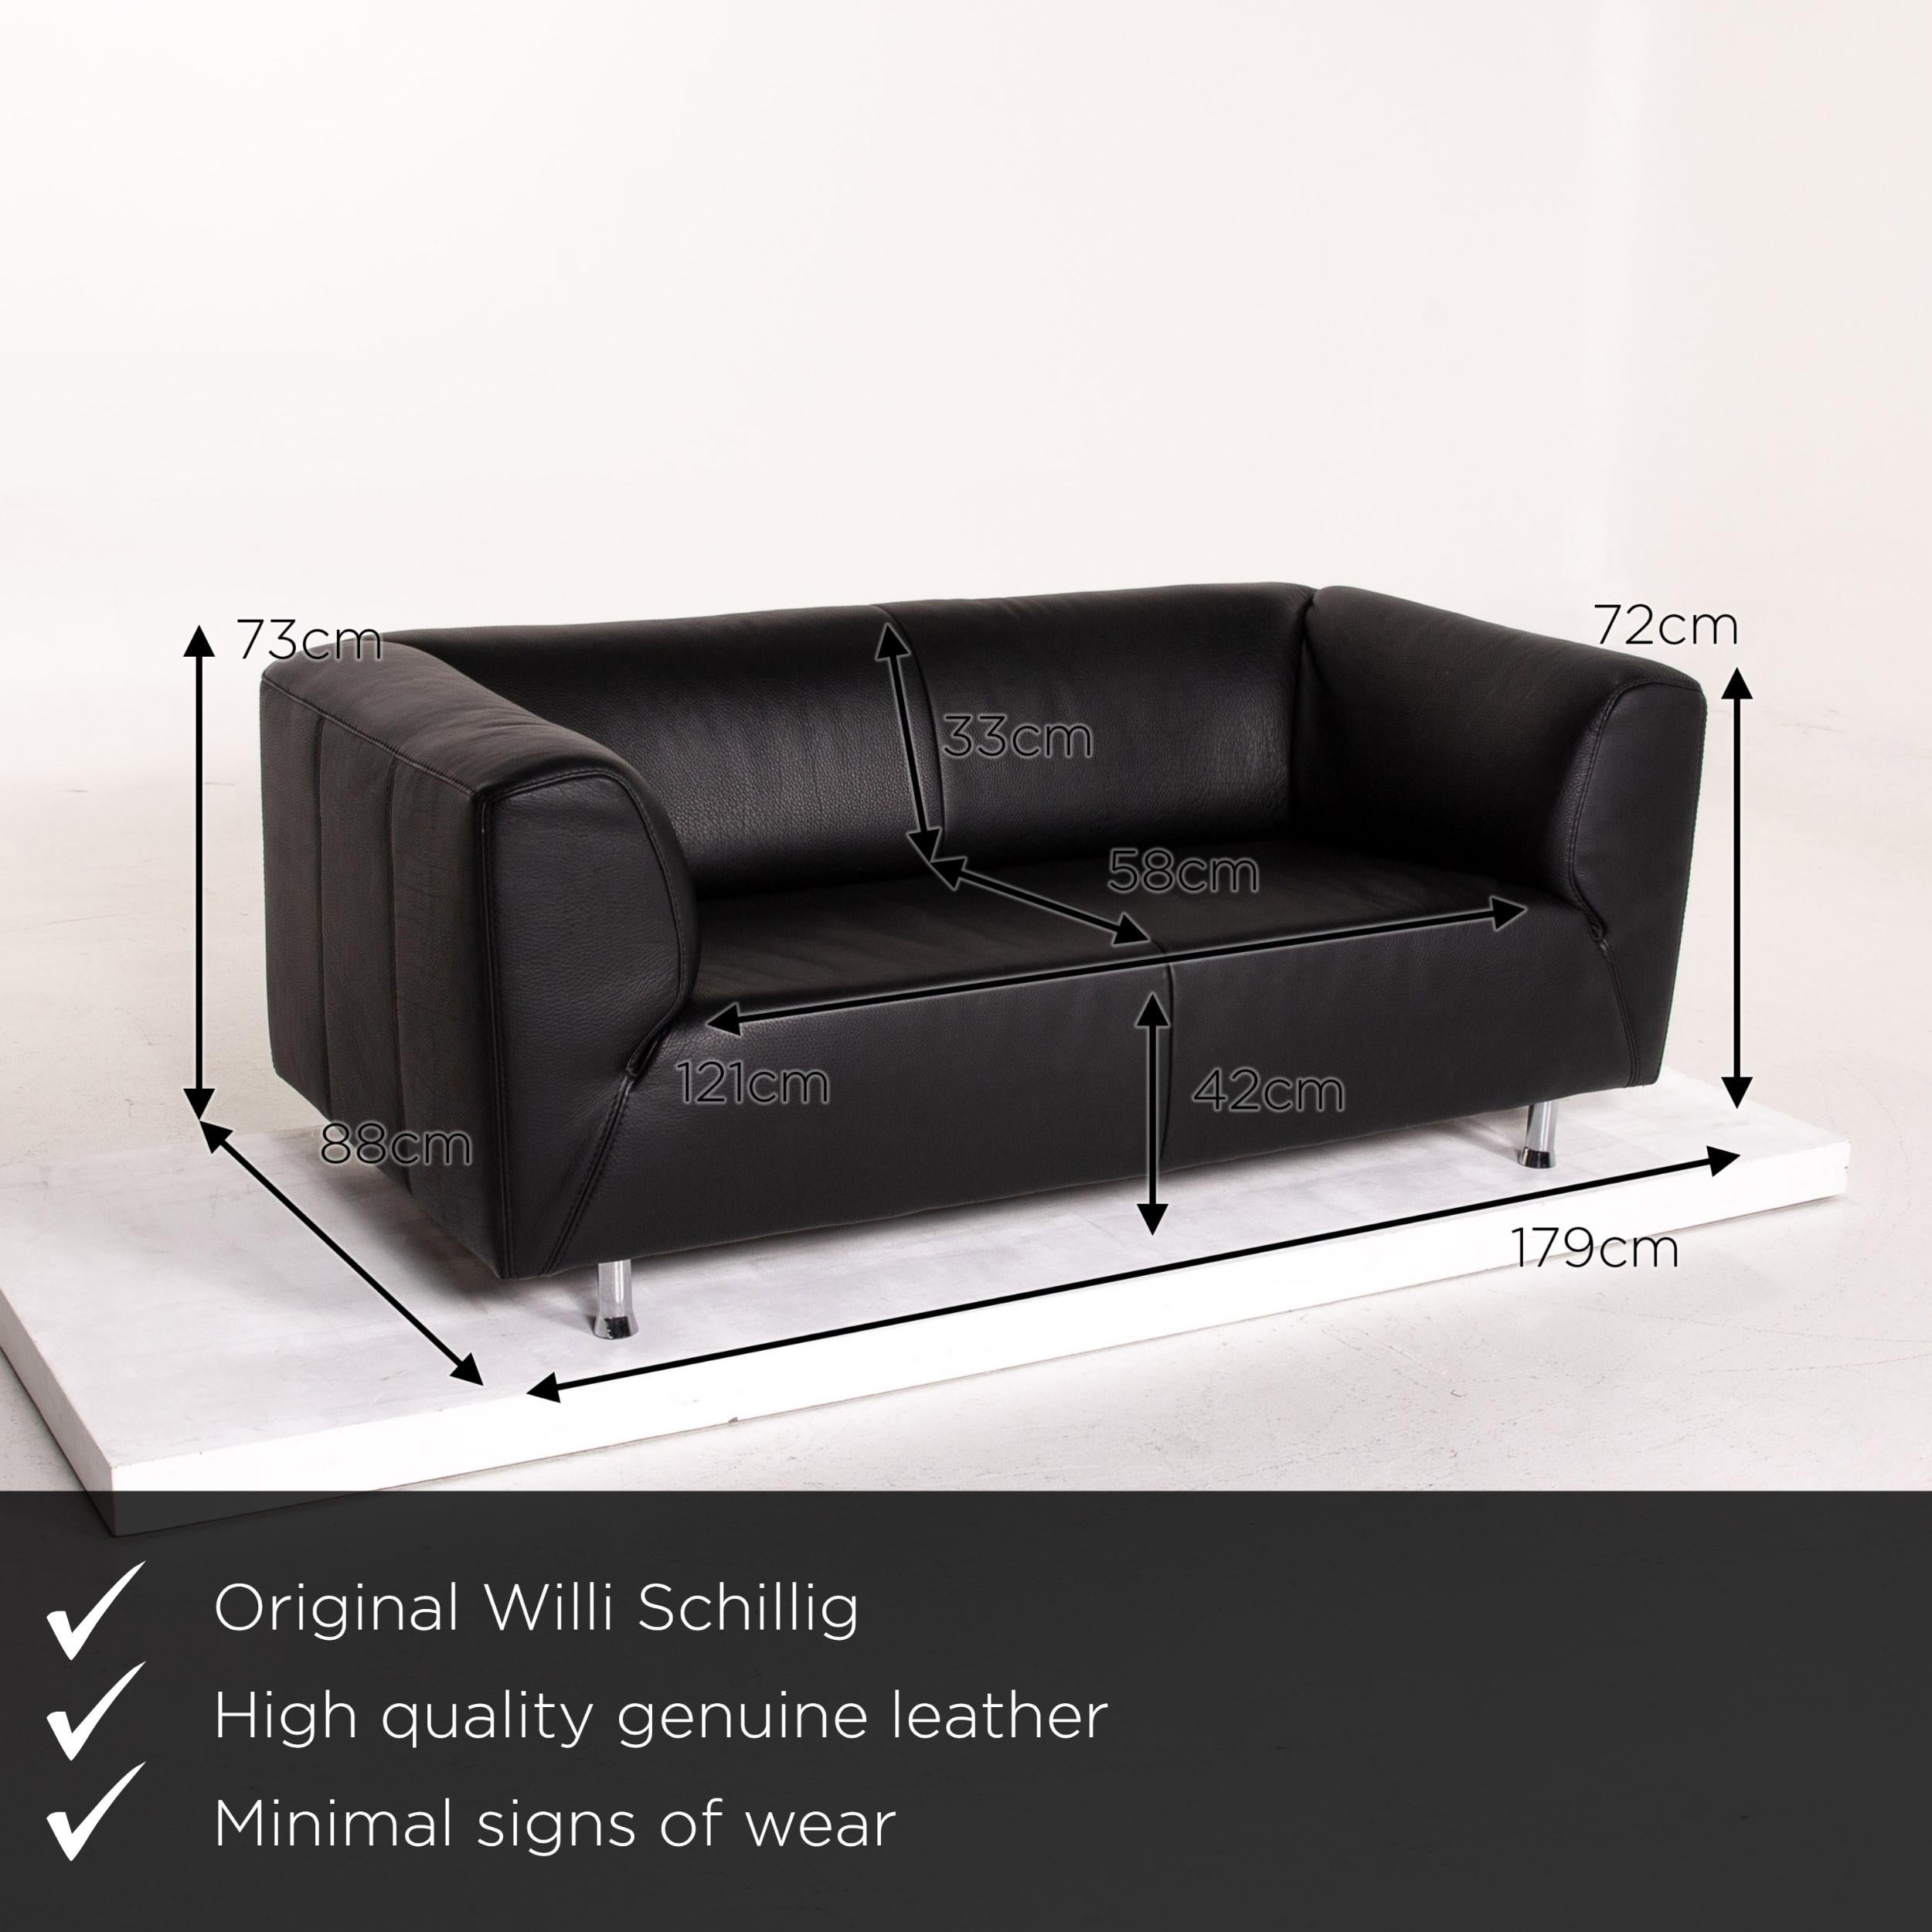 We present to you a Willi Schillig leather sofa black two-seat couch.

 

 Product measurements in centimeters:
 

Depth 88
Width 179
Height 73
Seat height 42
Rest height 72
Seat depth 58
Seat width 121
Back height 33.